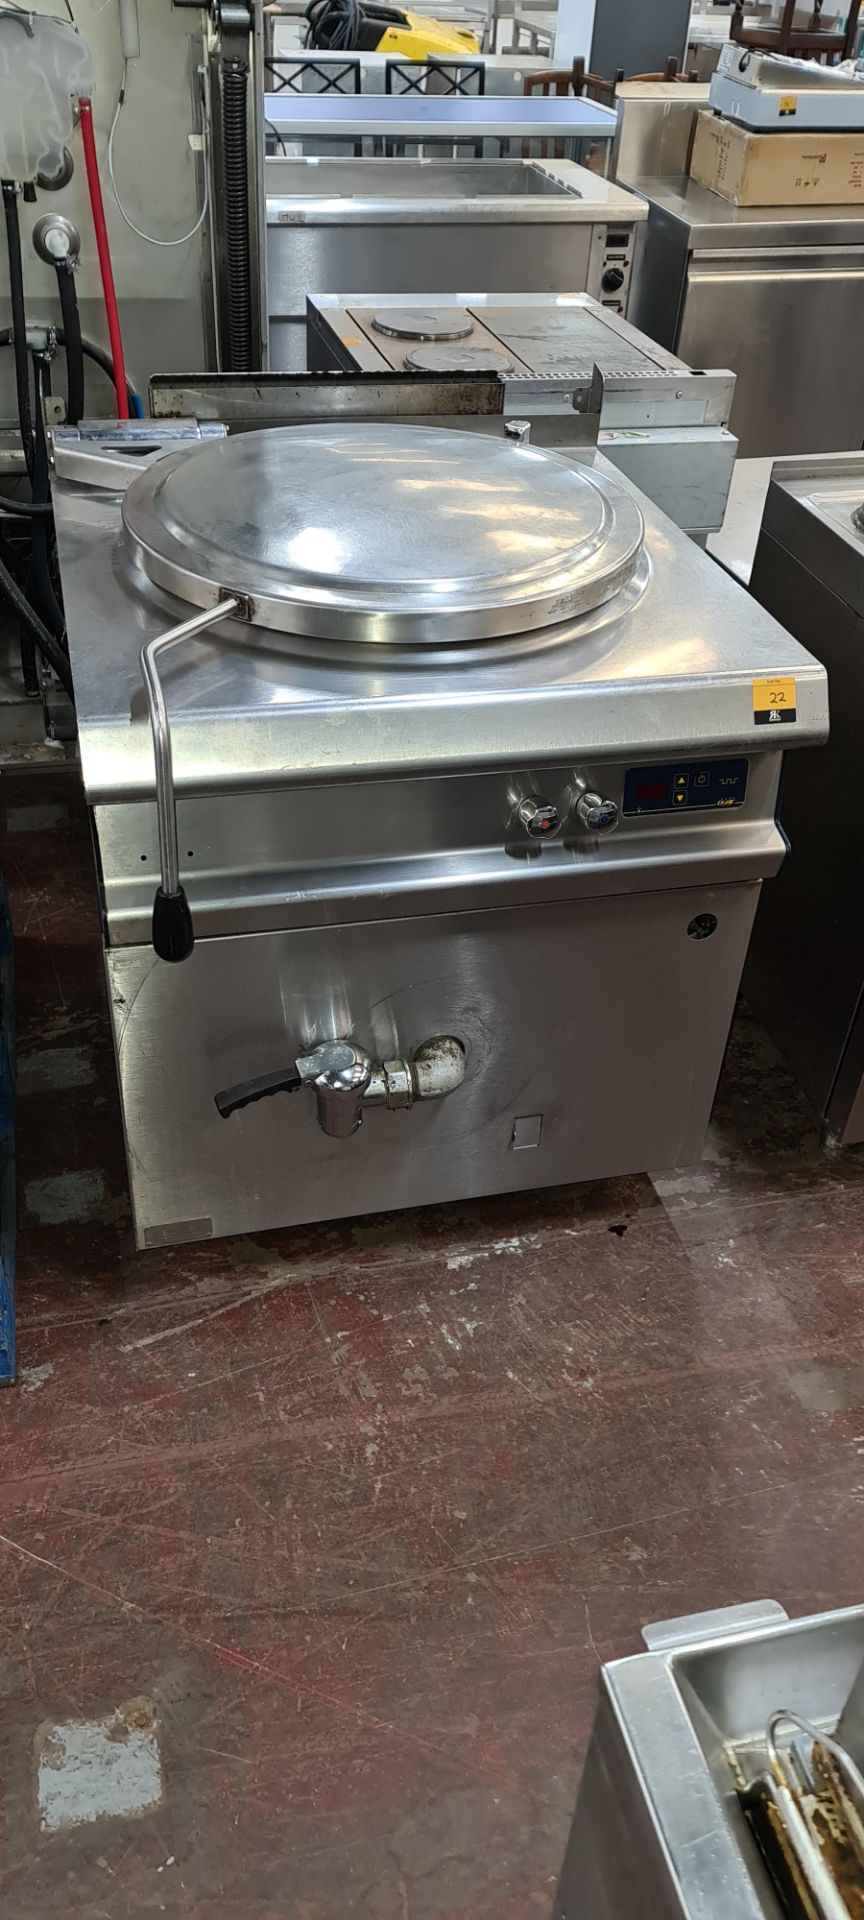 Stainless steel floor standing large pressure cooker system